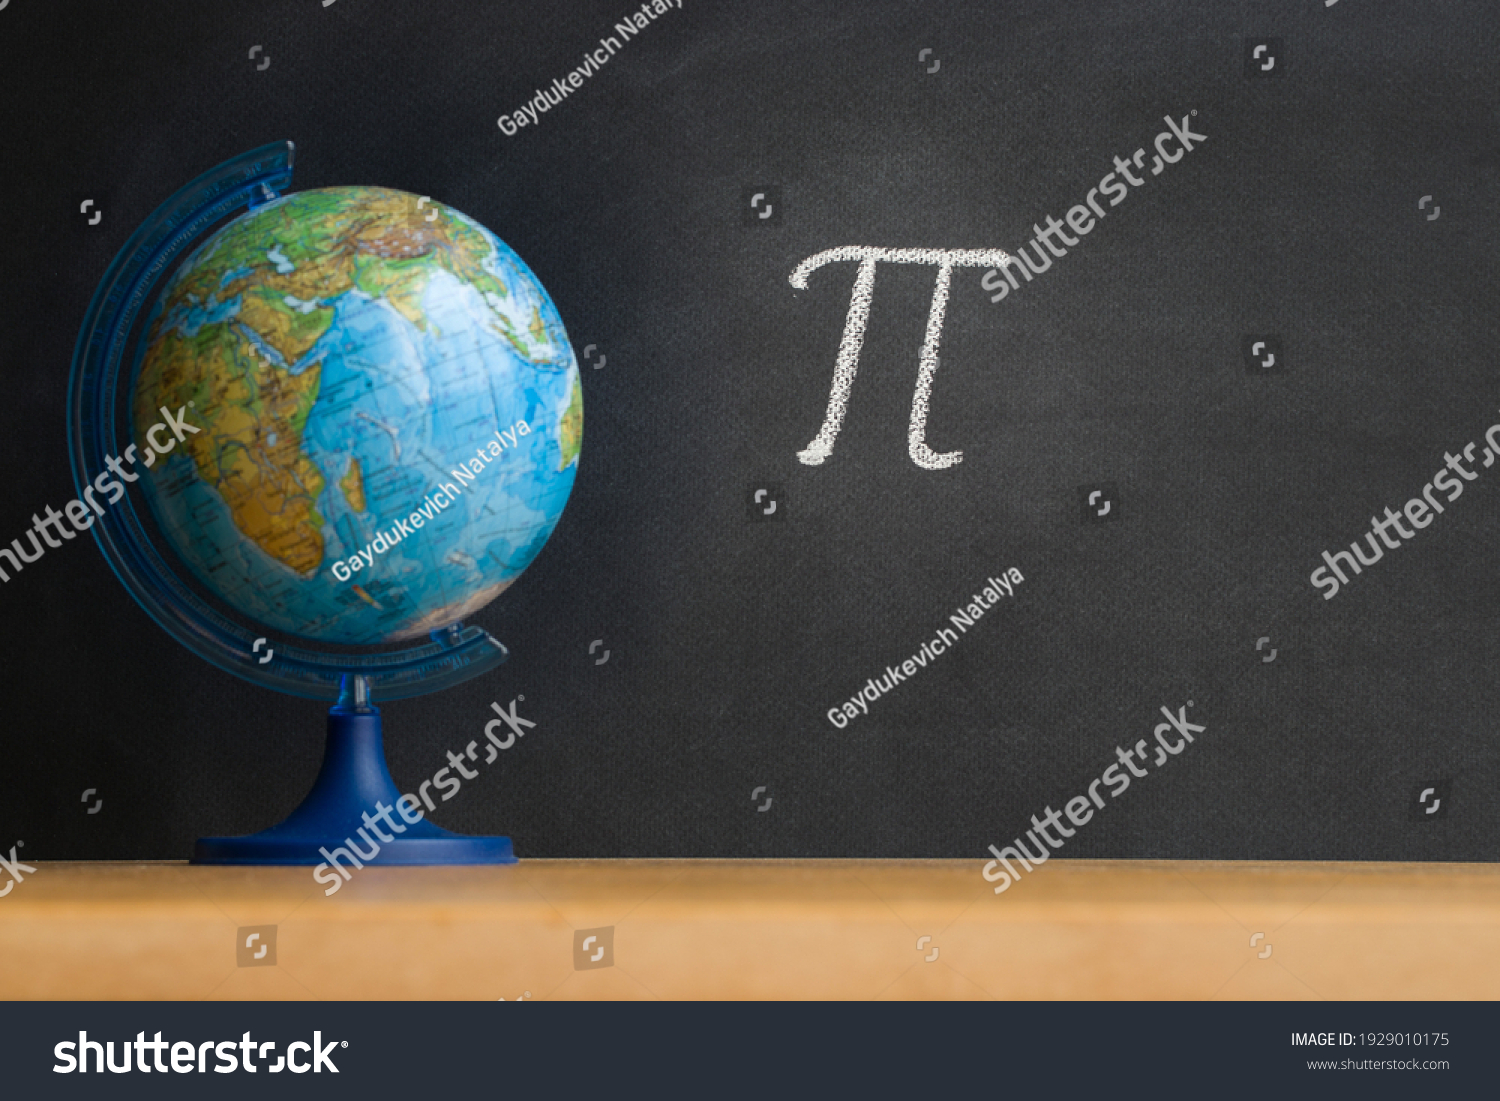 The Greek letter Pi, the ratio of the circumference to its diameter, is drawn in chalk on a black chalkboard in honor of the international number Pi for March 14 #1929010175